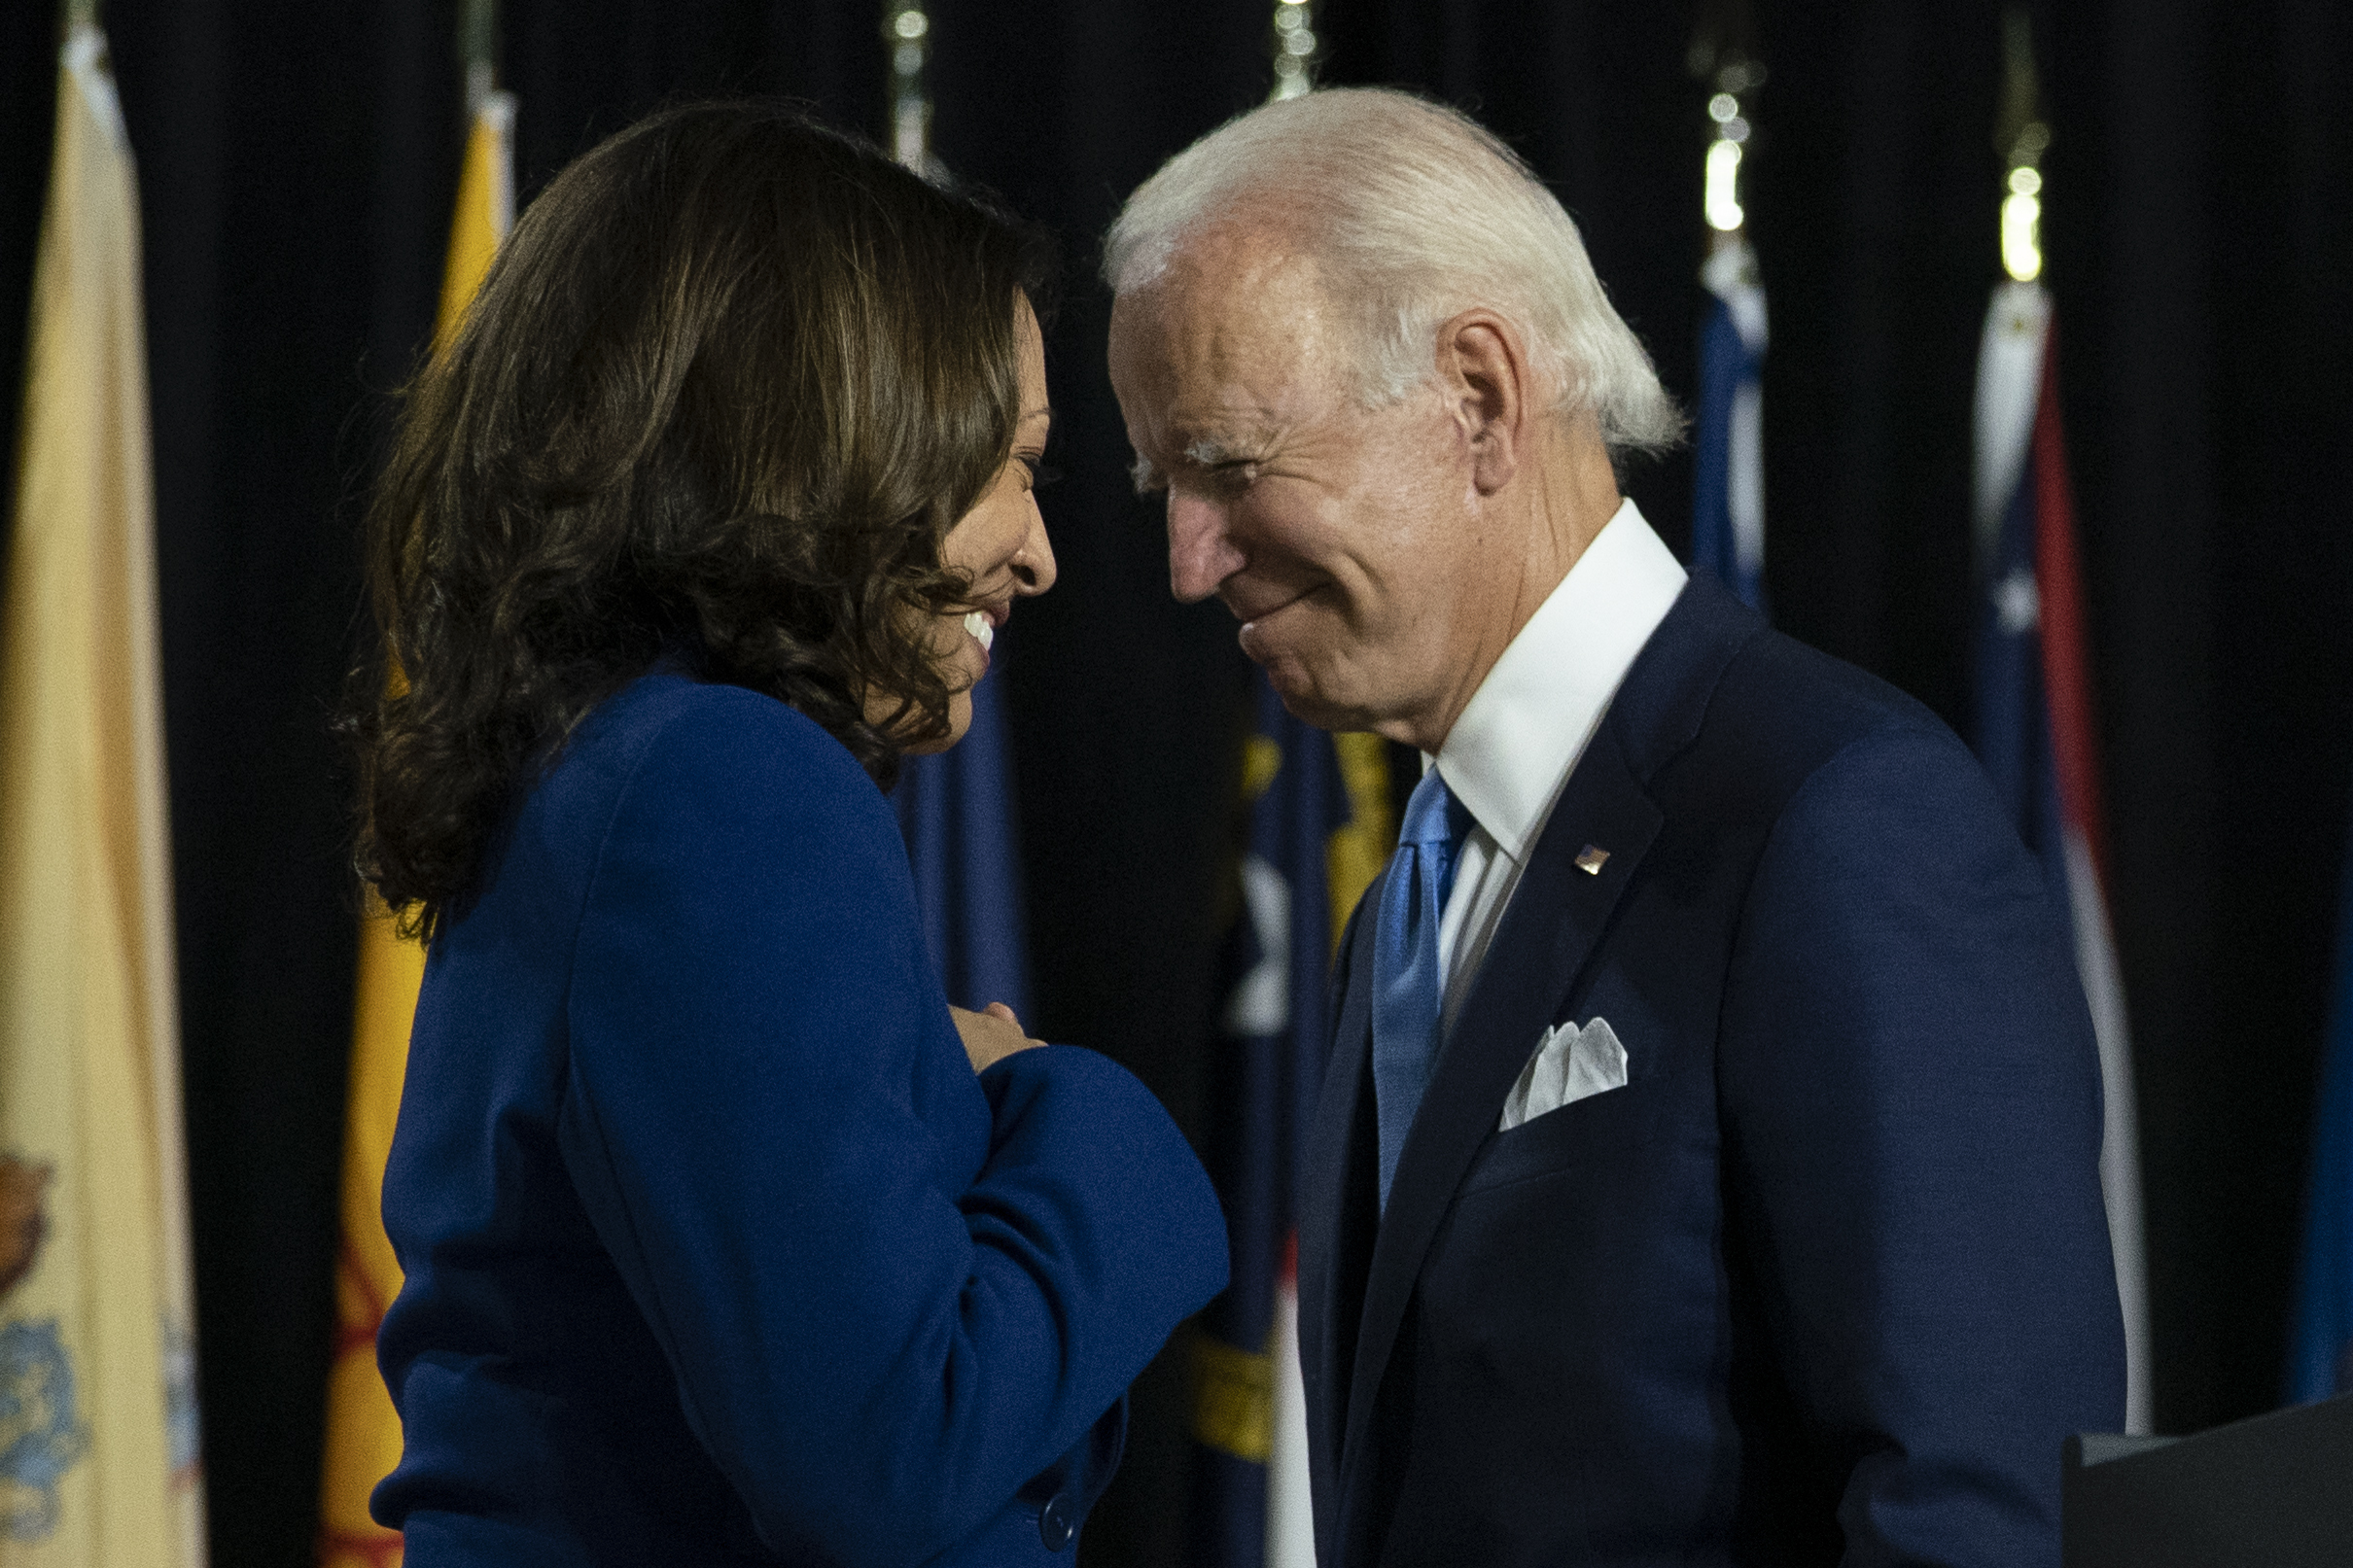 what did joe biden say about black voters - Biden|President|Joe|Years|Trump|Delaware|Vice|Time|Obama|Senate|States|Law|Age|Campaign|Election|Administration|Family|House|Senator|Office|School|Wife|People|Hunter|University|Act|State|Year|Life|Party|Committee|Children|Beau|Daughter|War|Jill|Day|Facts|Americans|Presidency|Joe Biden|United States|Vice President|White House|Law School|President Trump|Foreign Relations Committee|Donald Trump|President Biden|Presidential Campaign|Presidential Election|Democratic Party|Syracuse University|United Nations|Net Worth|Barack Obama|Judiciary Committee|Neilia Hunter|U.S. Senate|Hillary Clinton|New York Times|Obama Administration|Empty Store Shelves|Systemic Racism|Castle County Council|Archmere Academy|U.S. Senator|Vice Presidency|Second Term|Biden Administration